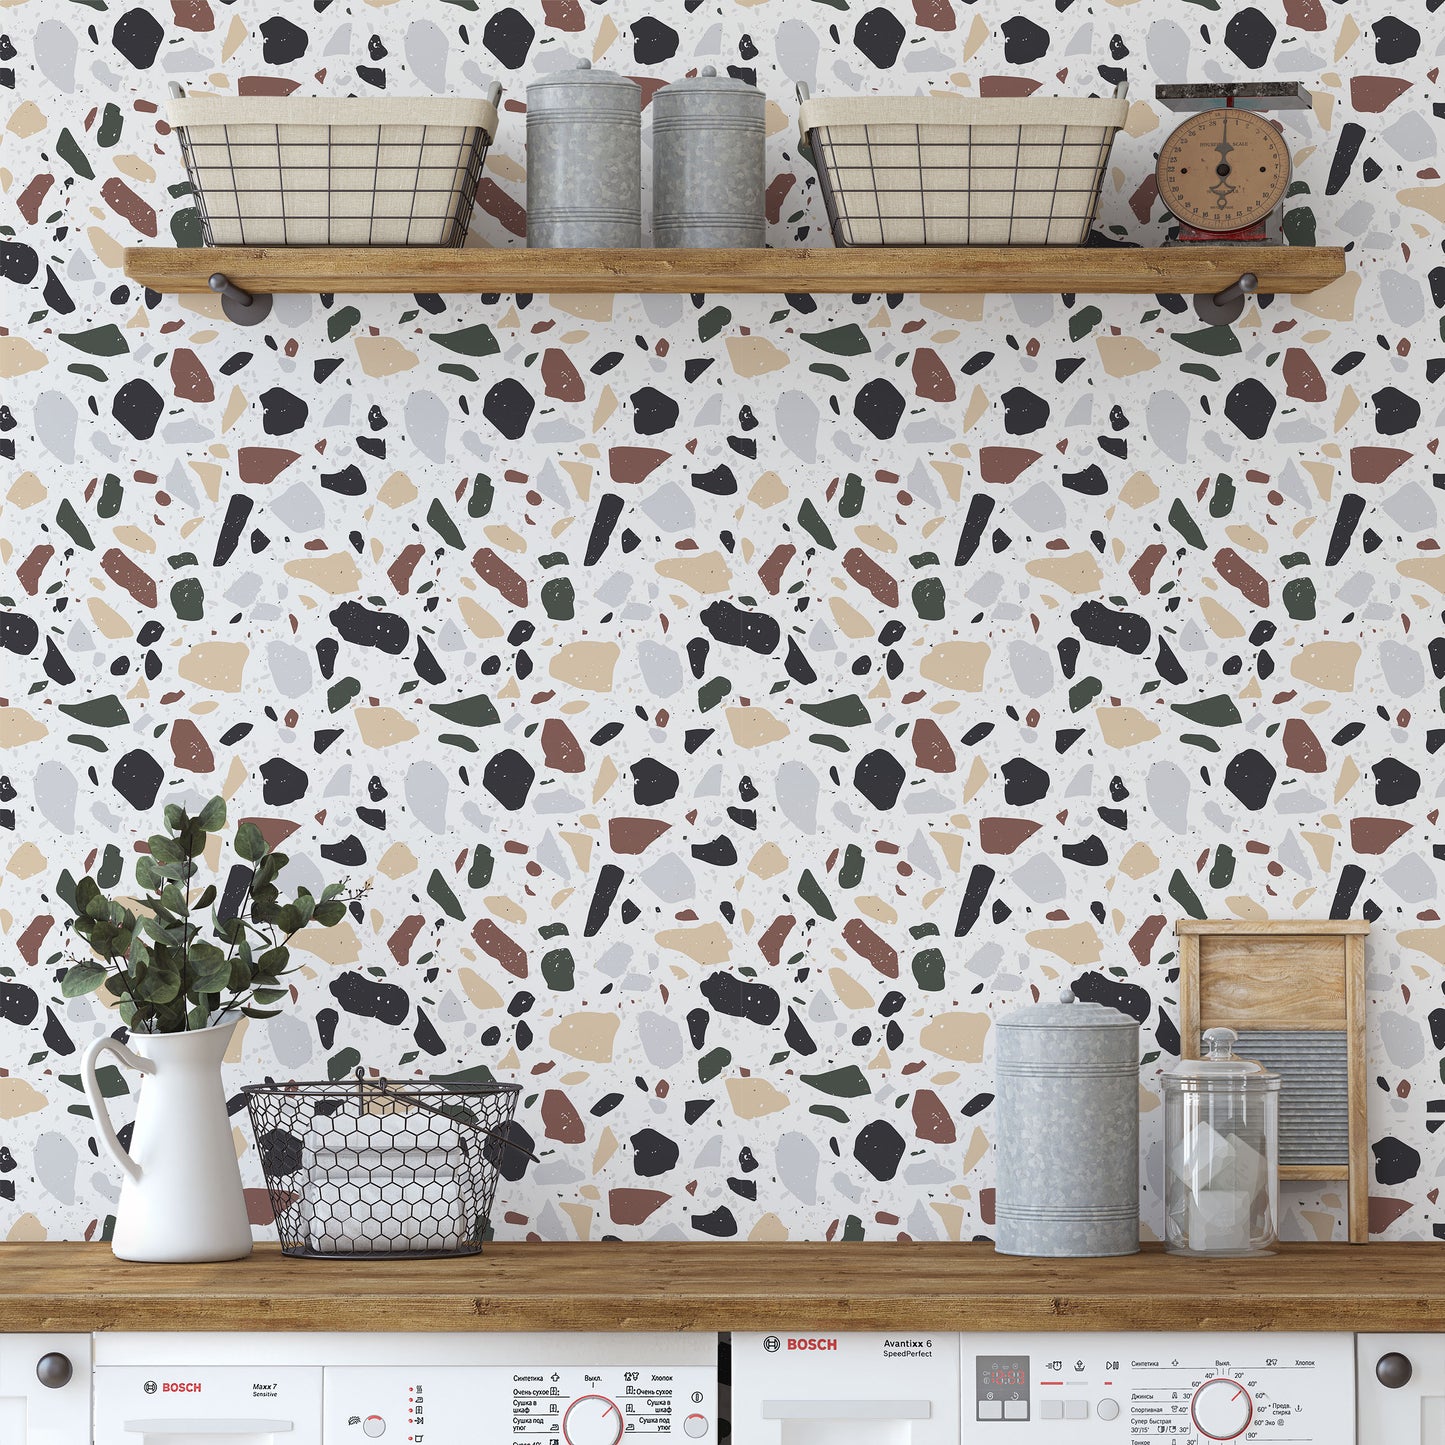 Brown, cream & teal terrazzo large print on cream background easy to install and remove peel and stick custom wallpaper available in different lengths/sizes locally created and printed in Canada wallpaper. Washable, durable, commercial grade, removable and waterproof.